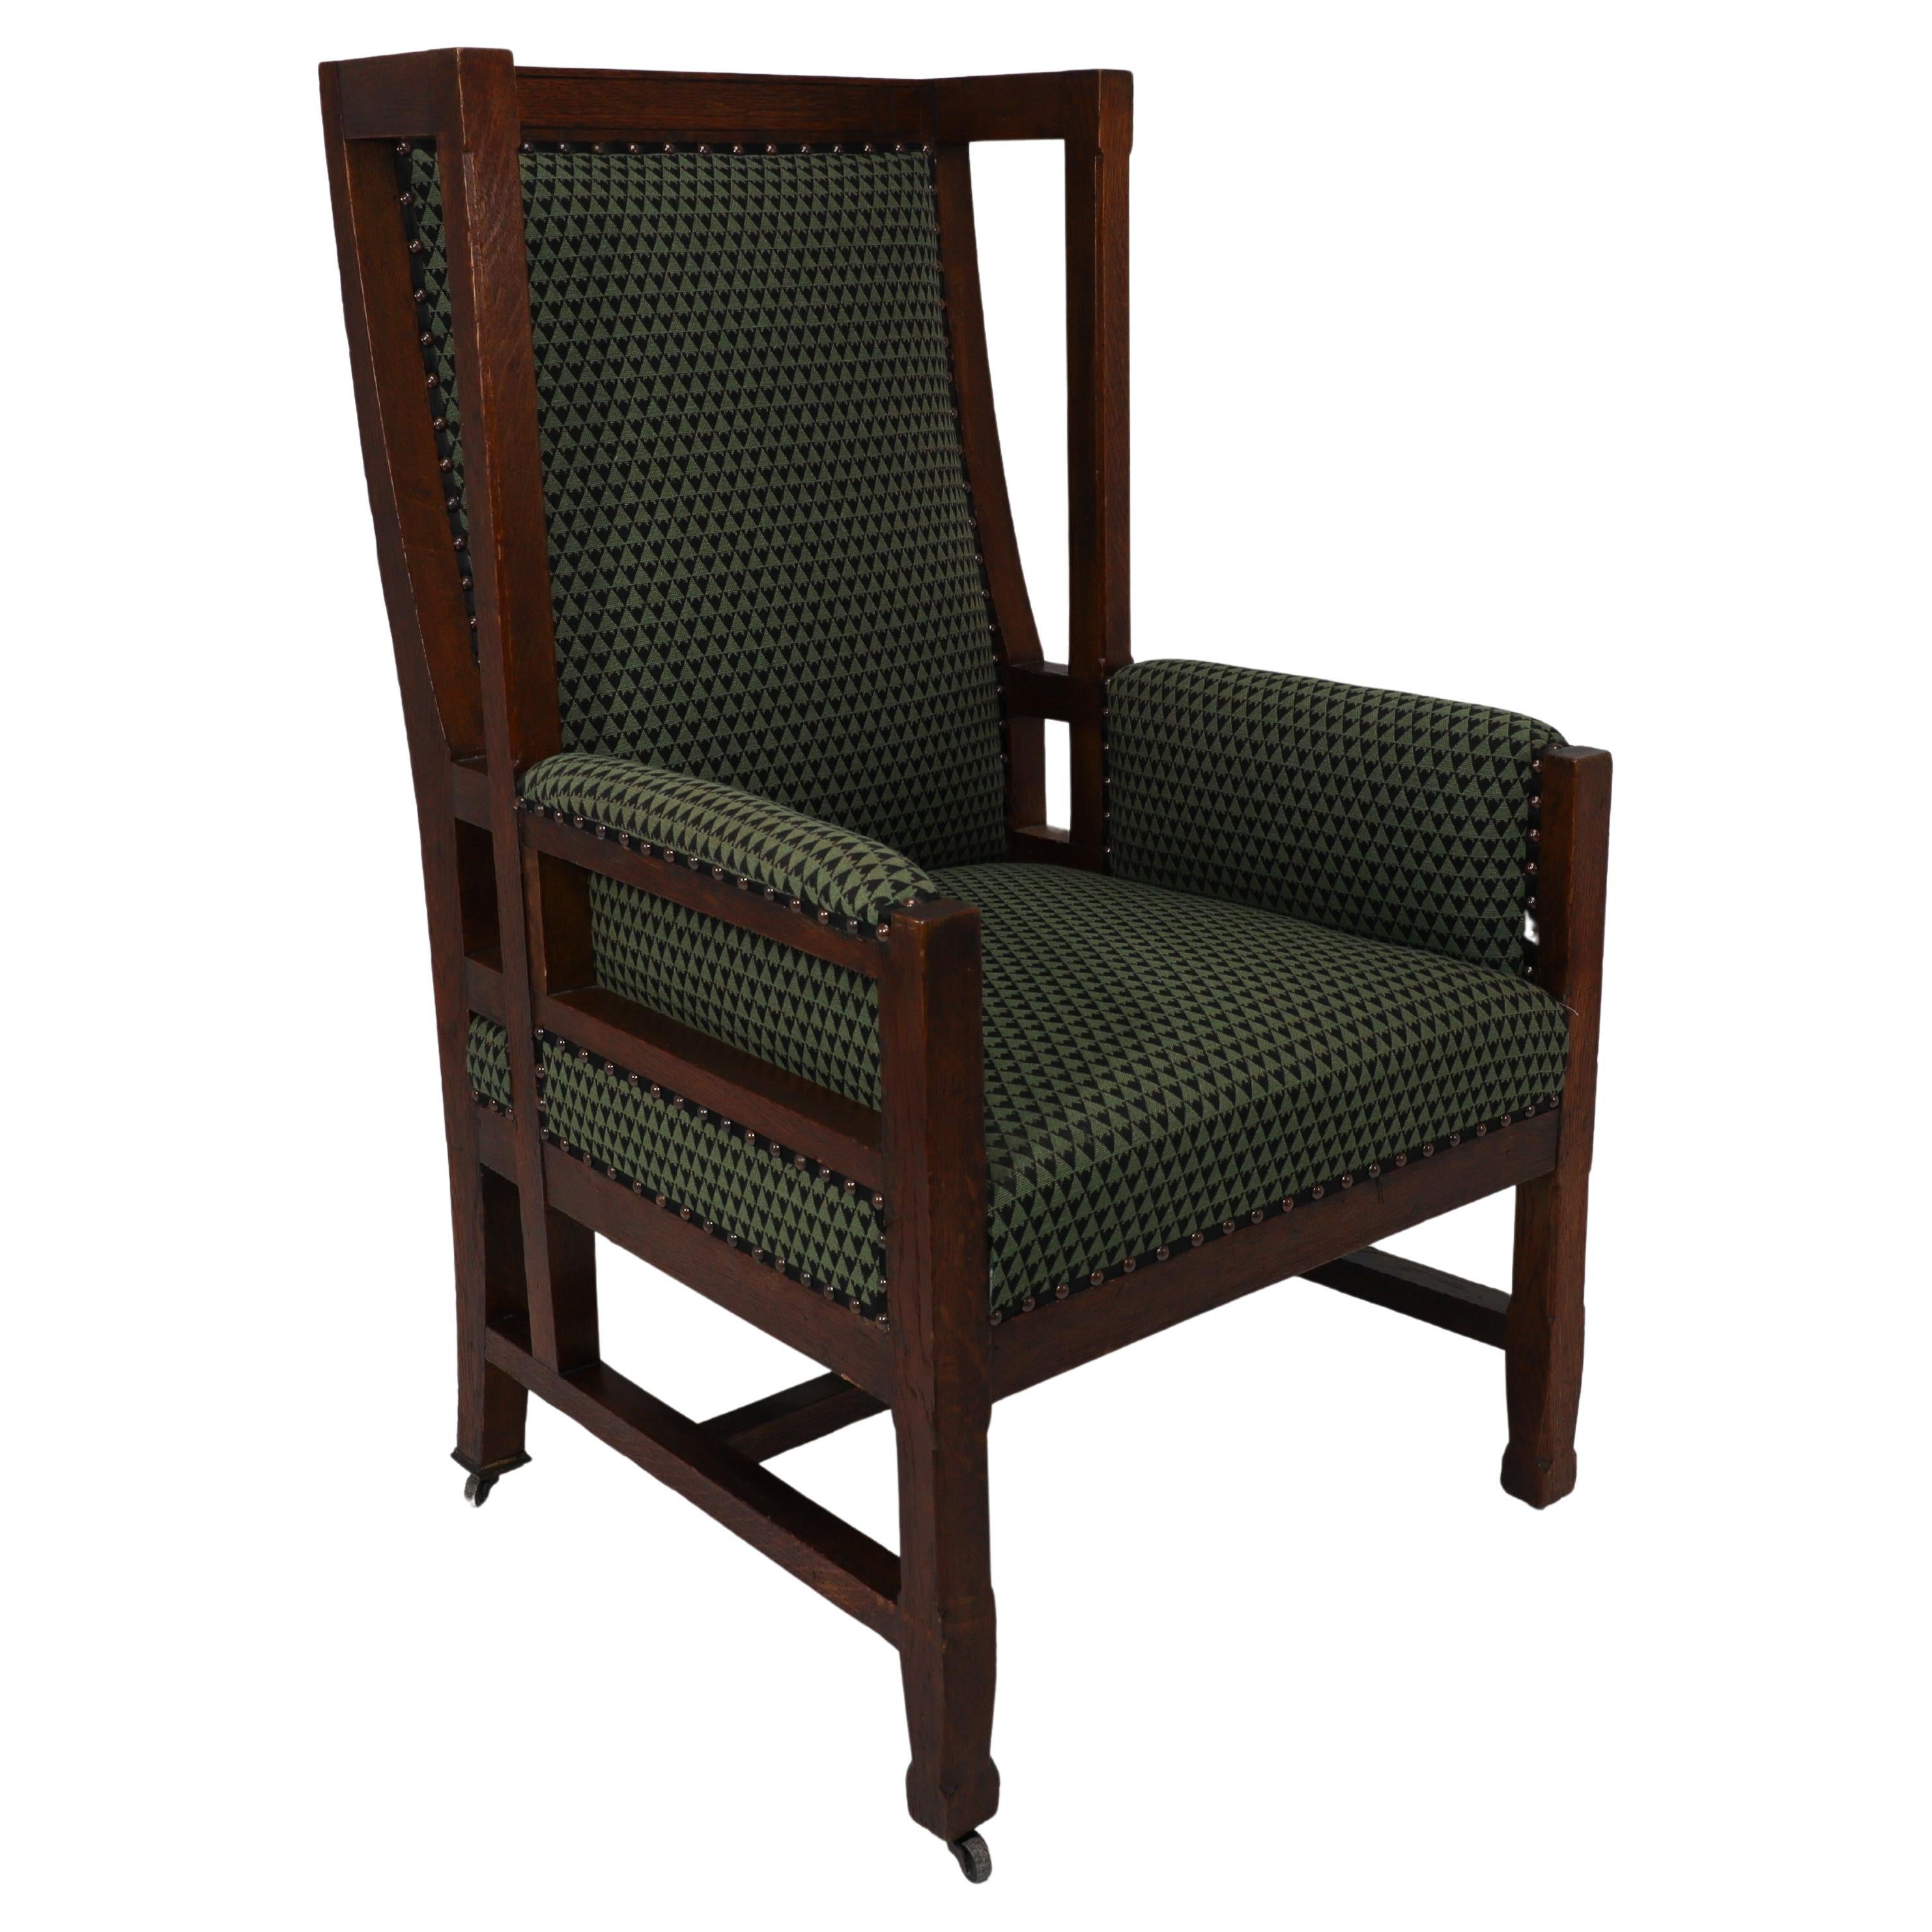 Liberty and Co, attr. in the style of Leonard Wyburd. An oak wing back armchair